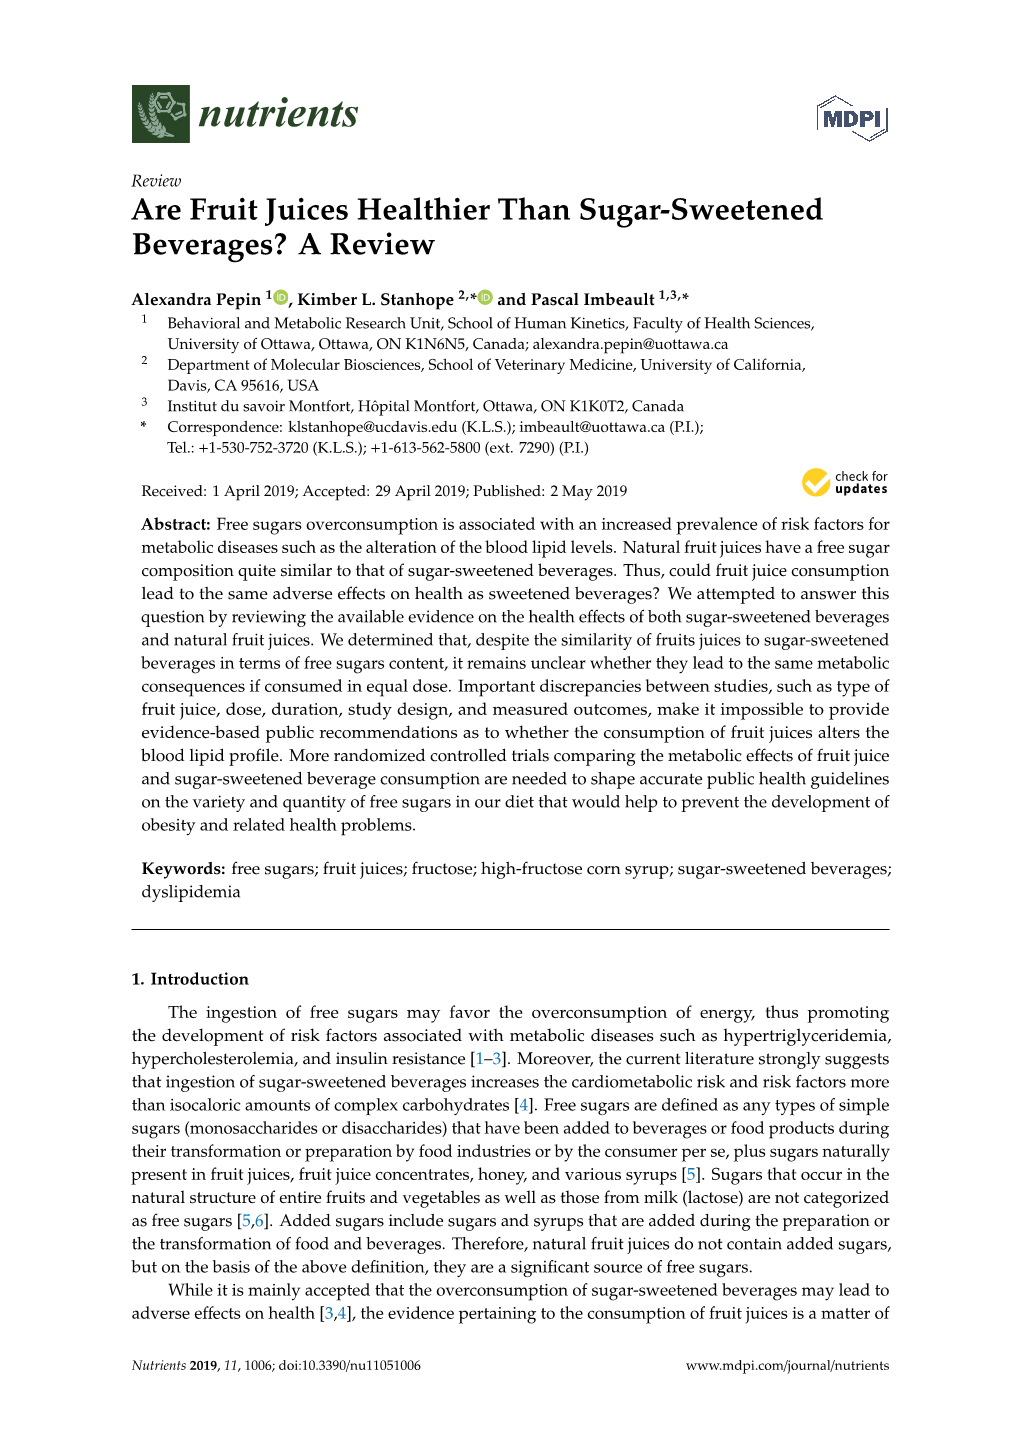 Are Fruit Juices Healthier Than Sugar-Sweetened Beverages? a Review